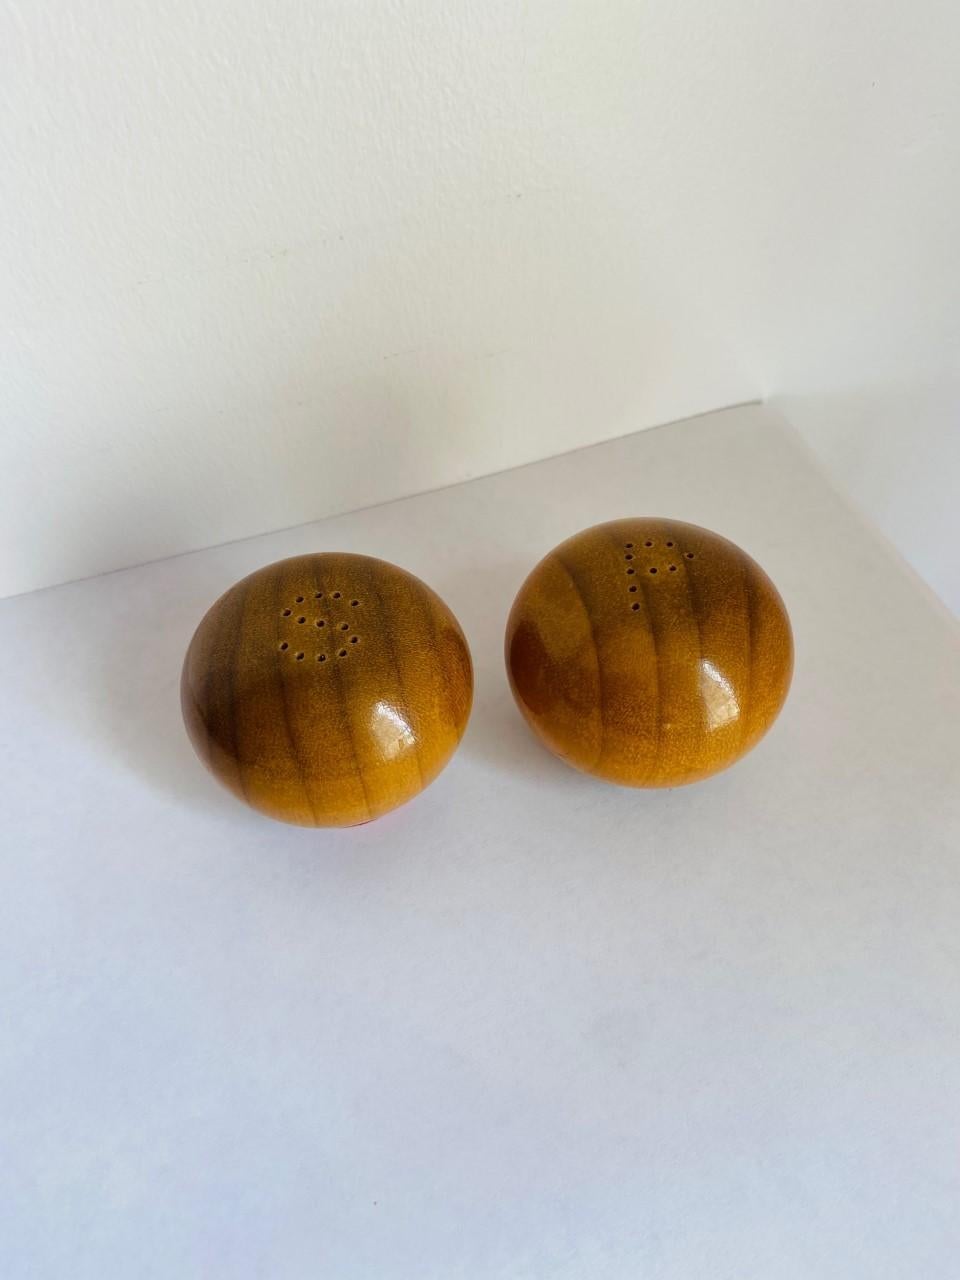 Beautiful and unique set of salt and pepper shakers. This pair is handmade in polished finished wood that shows beautiful grain. Each piece has fine details such as the 